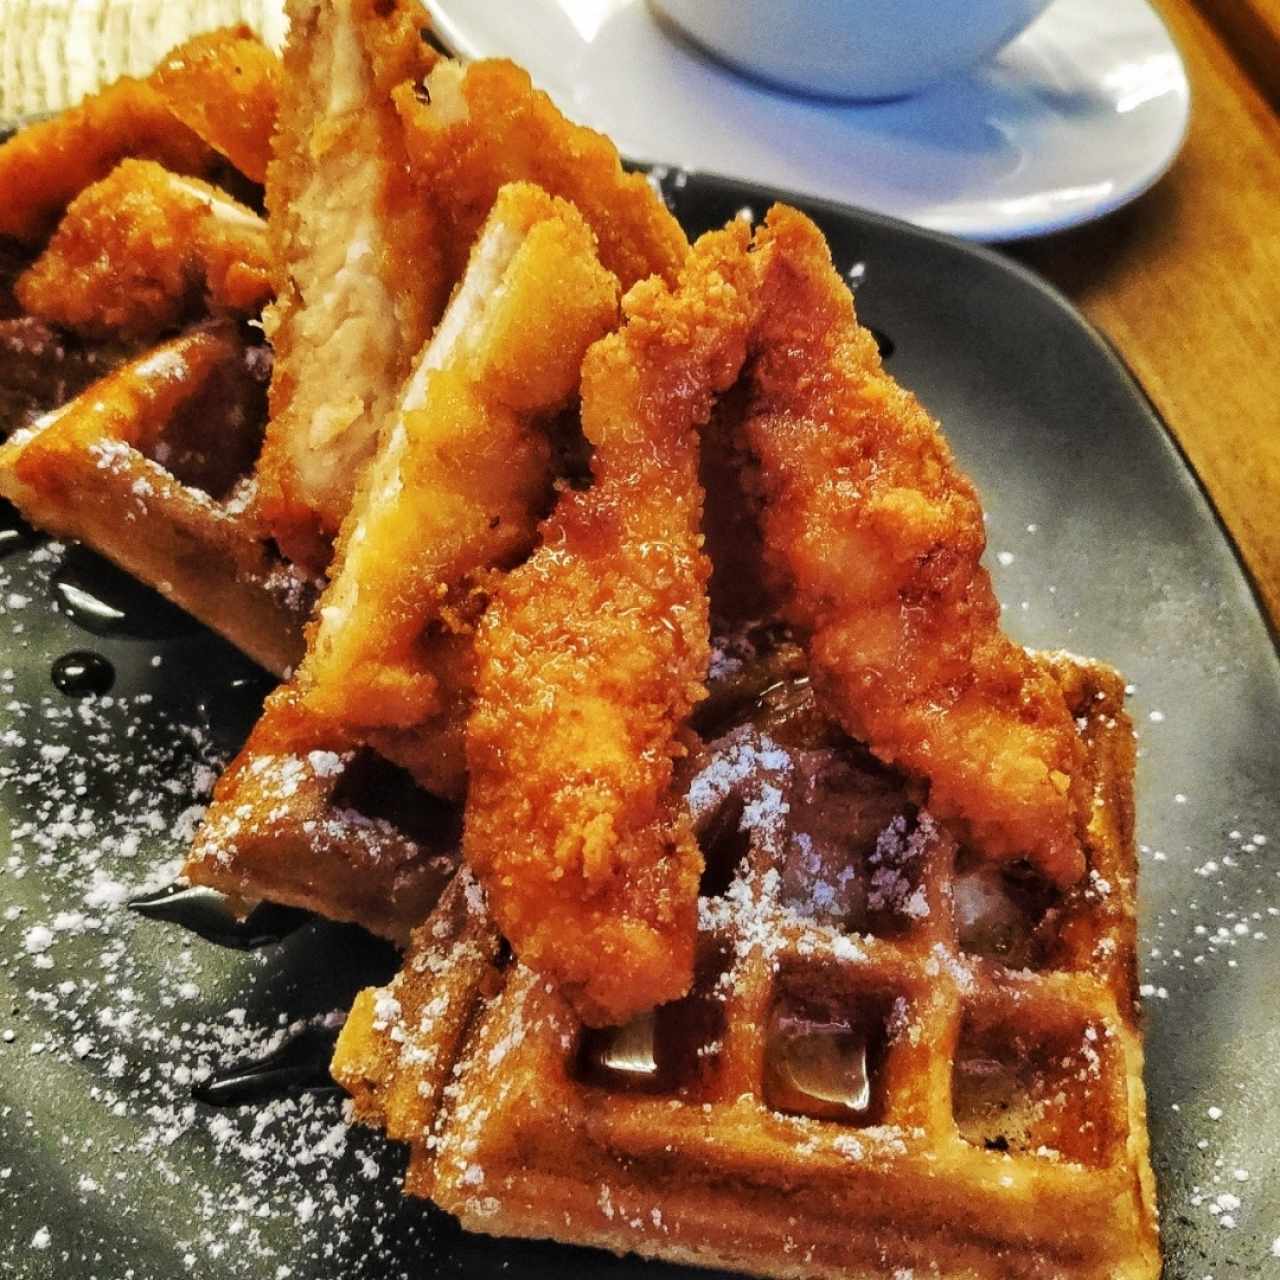 chicken and waffles